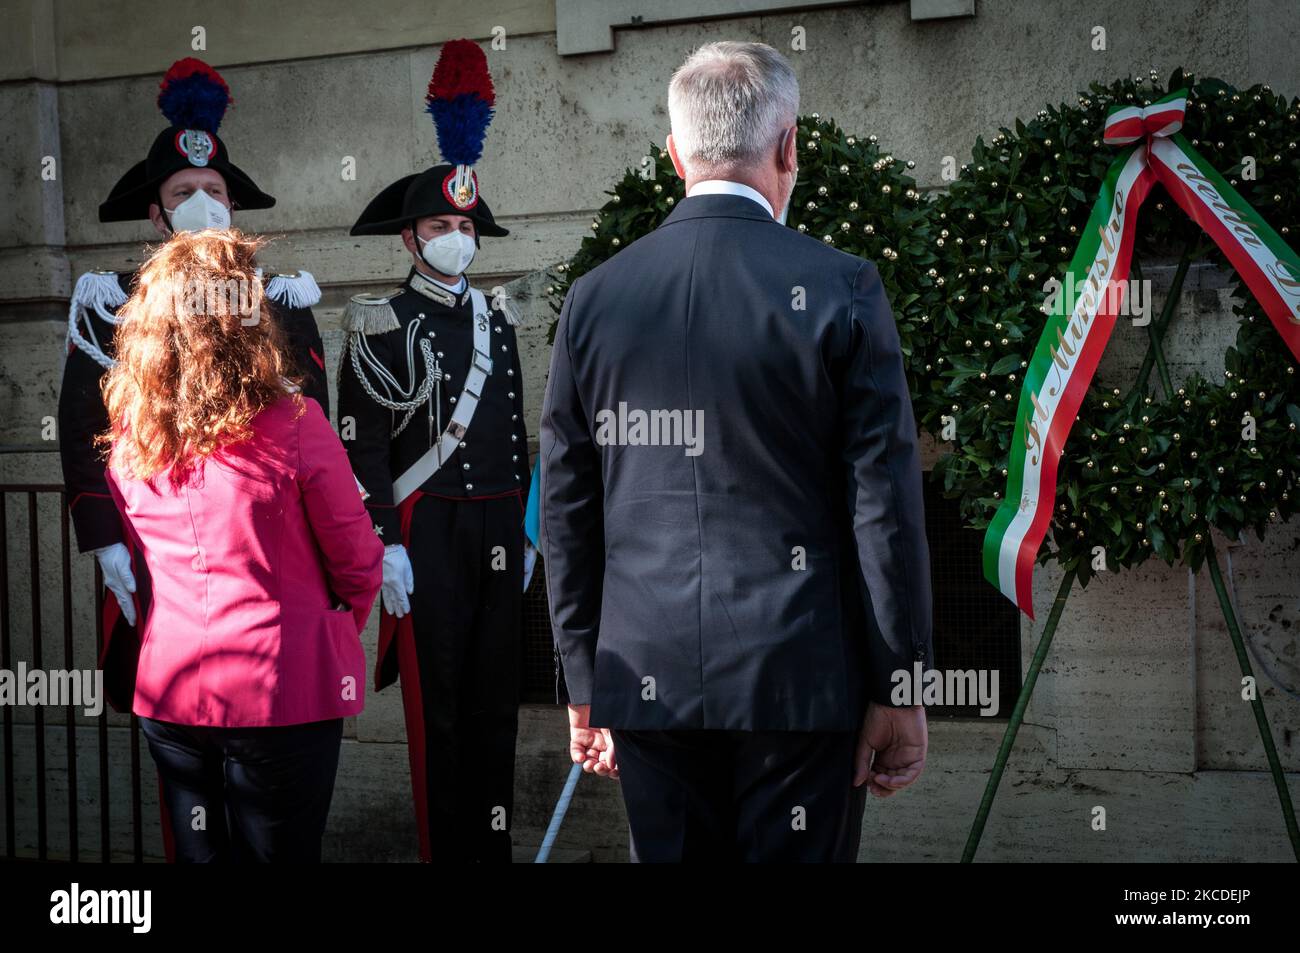 Italian Defense Minister Lorenzo Guerini and the President of the Jewish Community of Rome Ruth Dureghello (L) attend the celebration of the 76th anniversary of the Liberation of Italy from Nazi-fascism. The Jewish Community of Rome commemorates in front of the plaque affixed in memory of the partisans to the Tempio Maggiore in Rome, Italy on April 25, 2021. (Photo by Andrea Ronchini/NurPhoto) Stock Photo